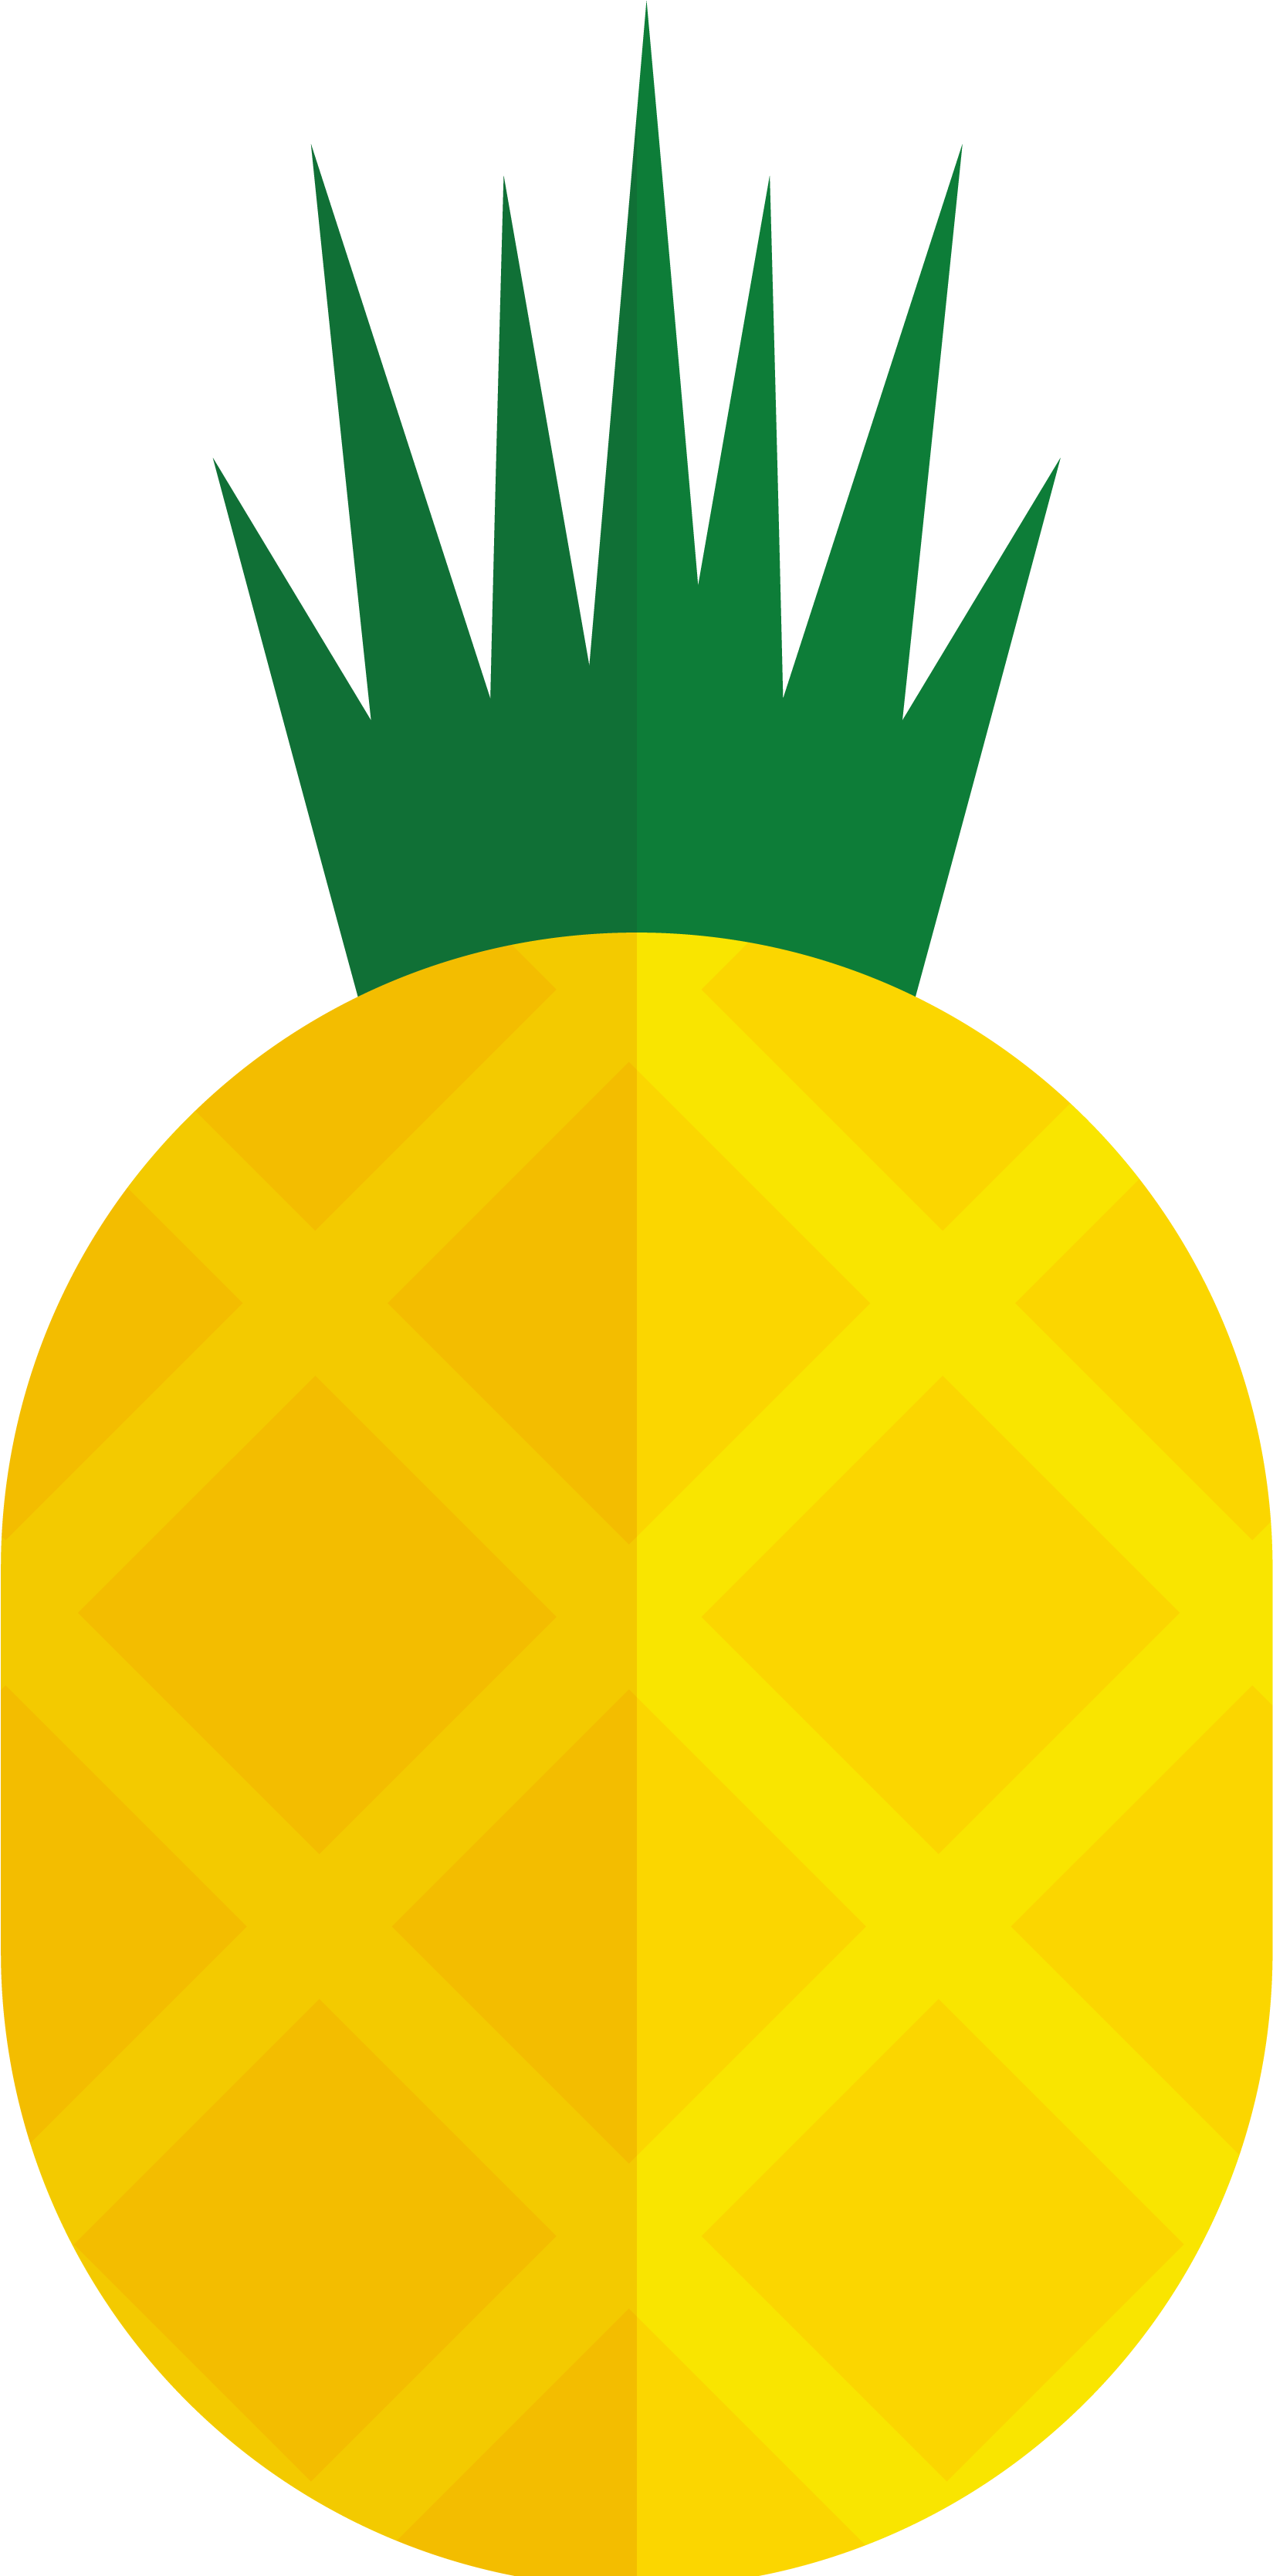 Collection Of Free Pineapple Vector Leaf Cartoon Pineapple